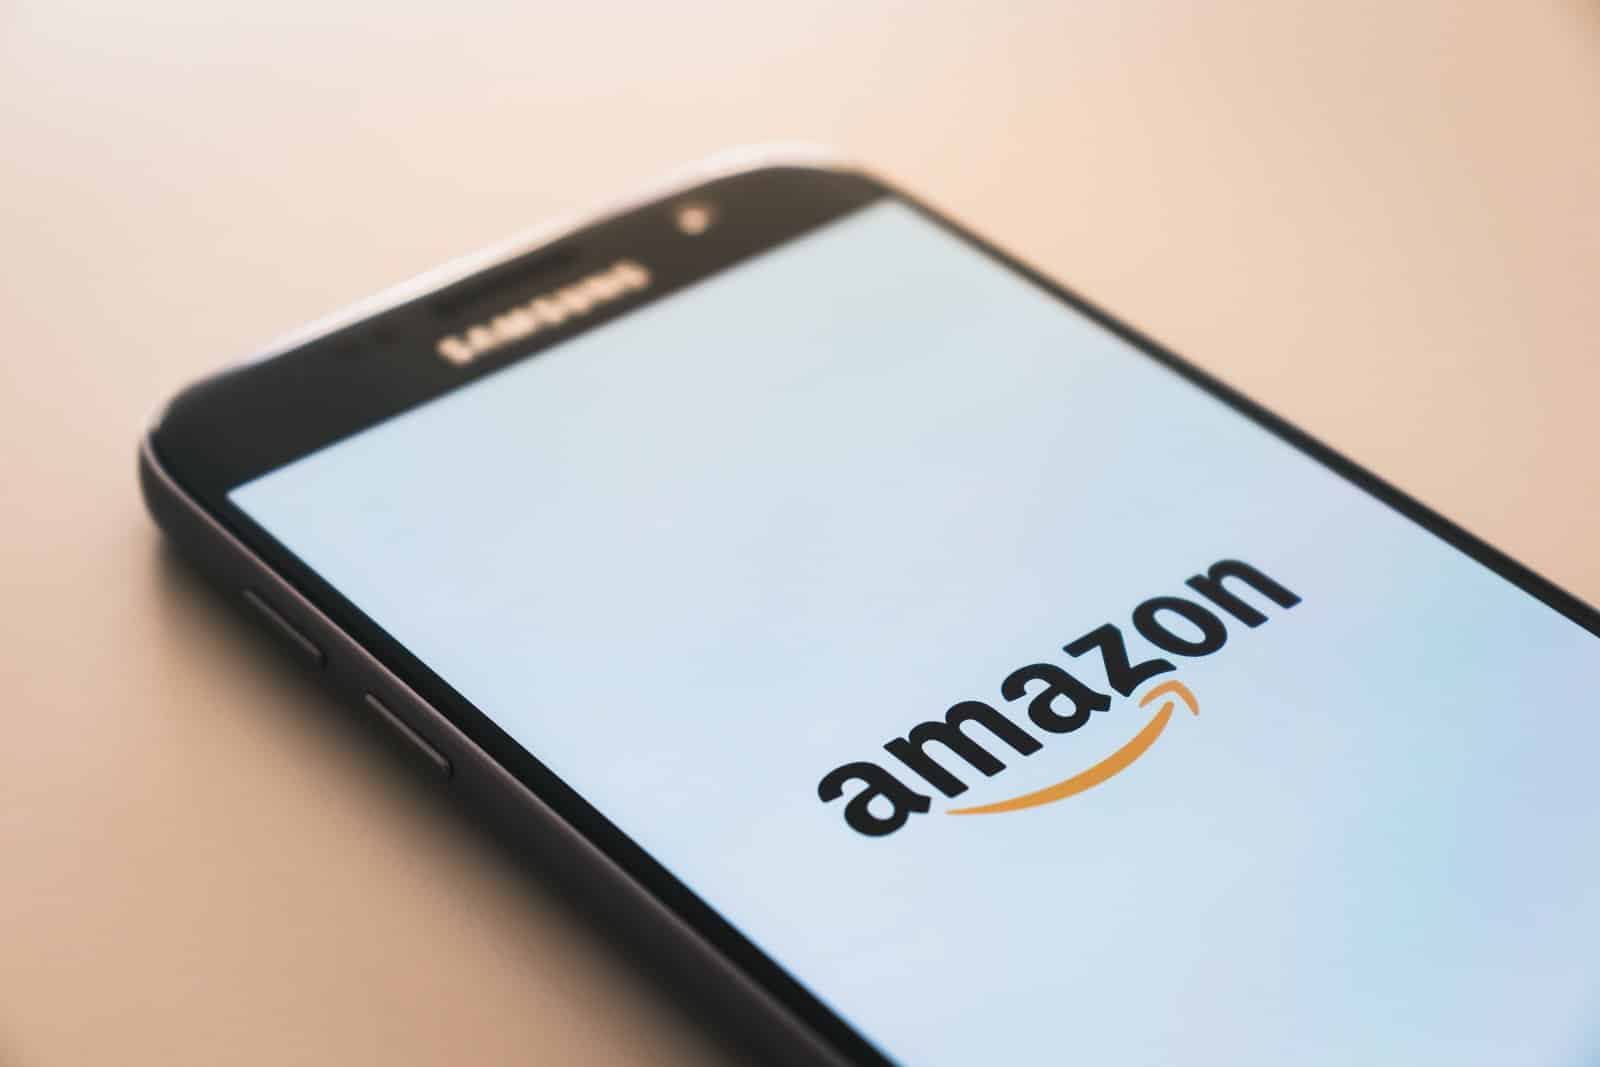 Amazon Gift Card Deals: phone with Amazon logo on it